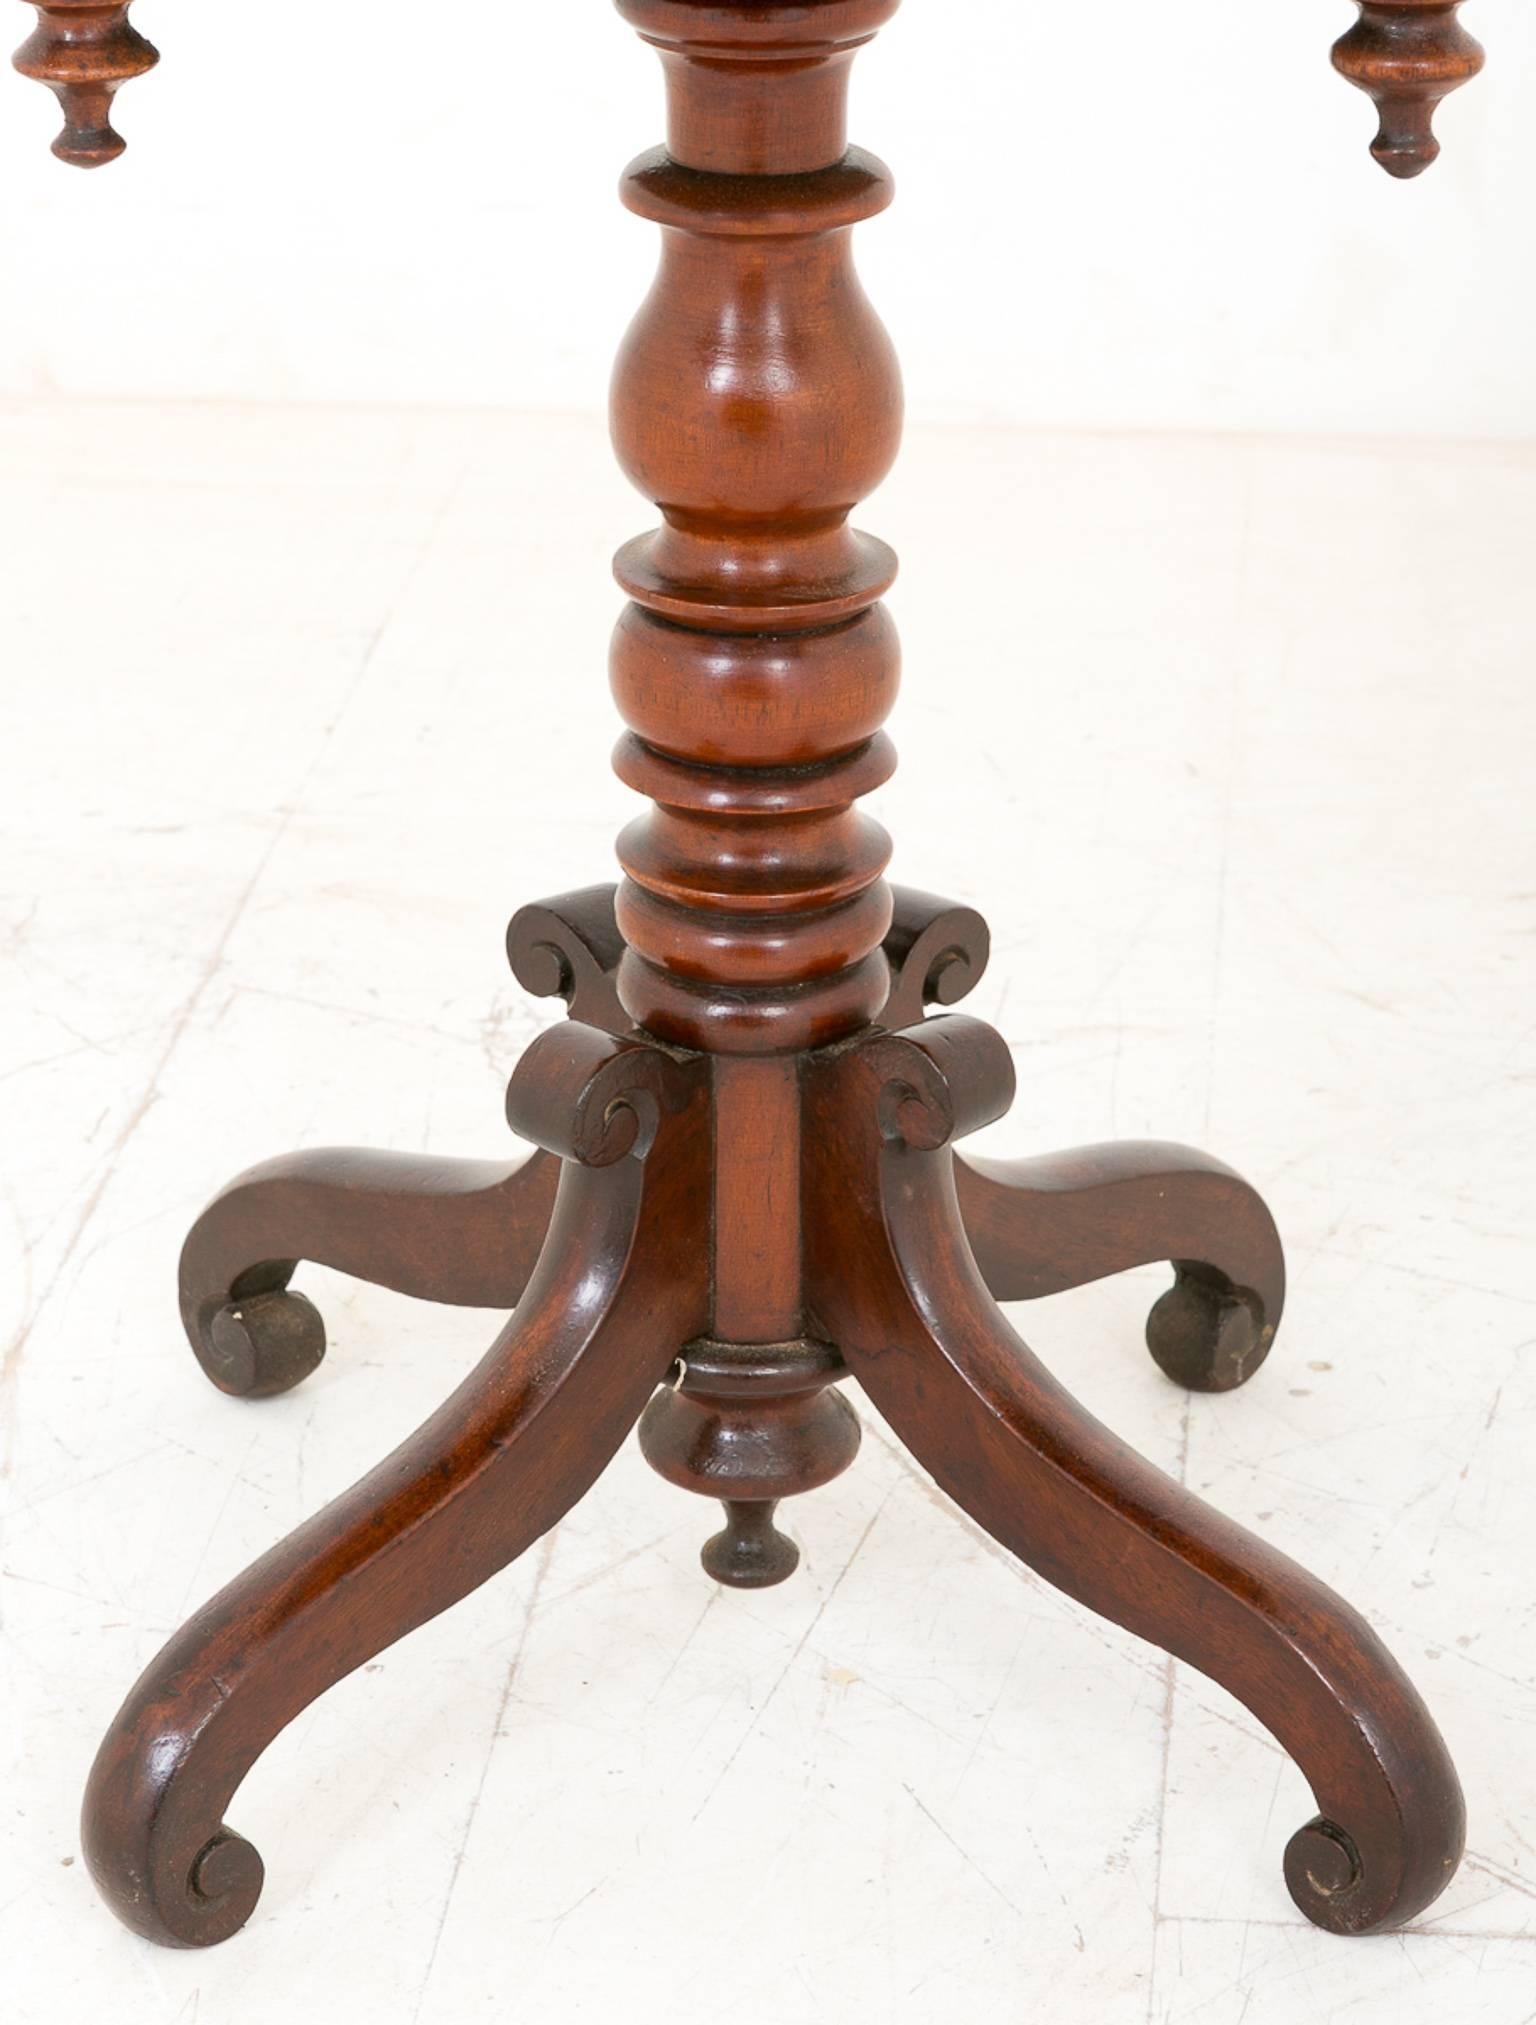 A very pretty William IV mahogany occasional table.
Standing on a stylized swept leg with a multi ring turned column.
Th0e top section featuring one double depth Mahogany lined drawer with fine dovetails and original locks and knobs.
The single